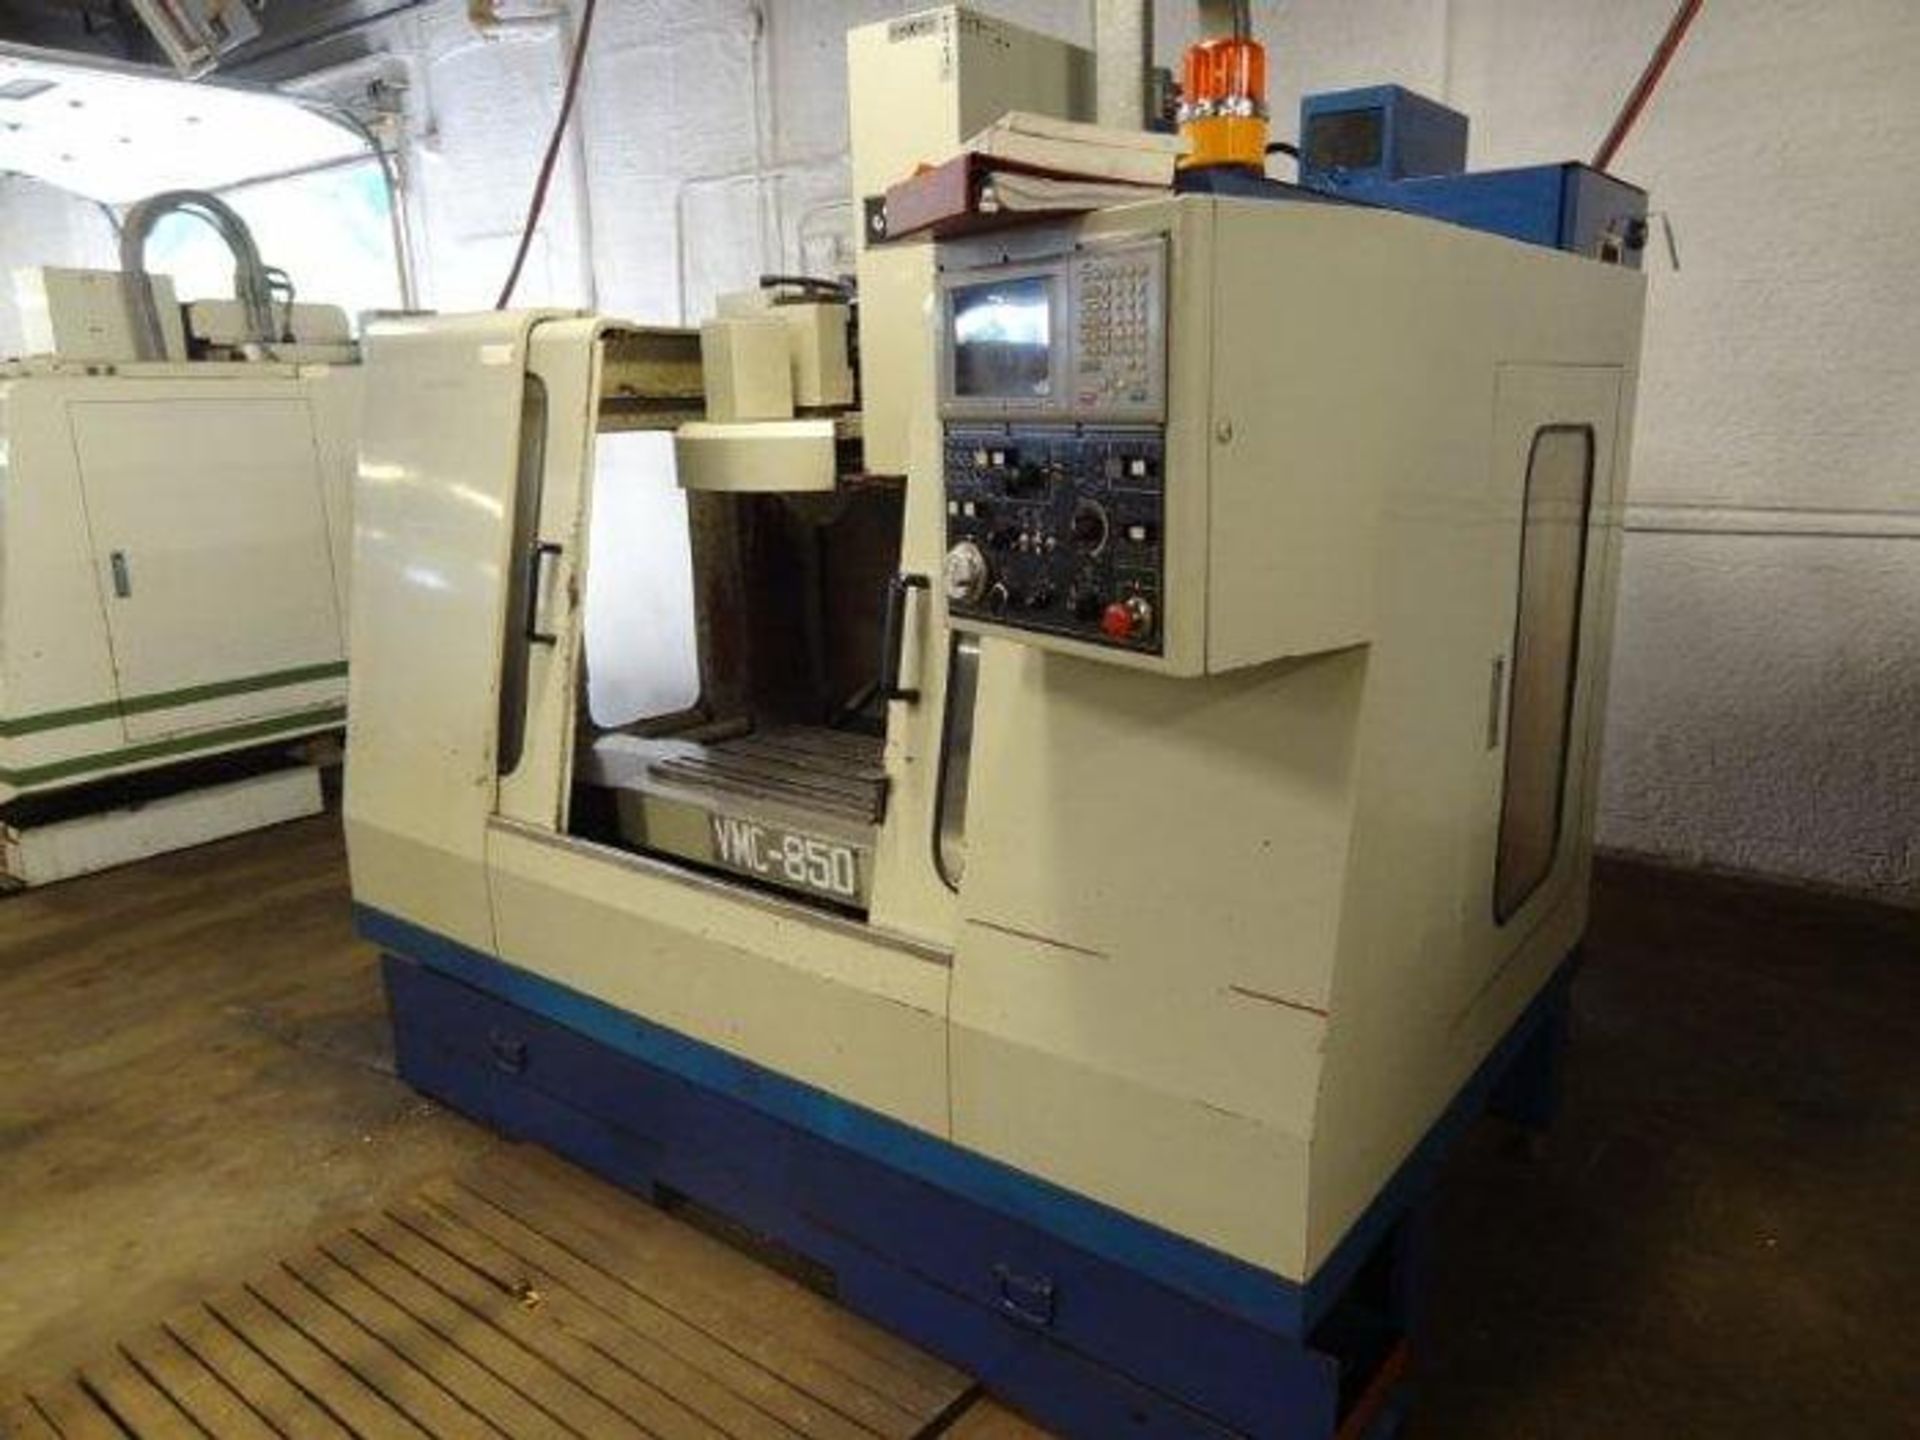 MIGHTY COMET VMC850 34" X 20" X 20" VERTICAL MACHINING CENTER, YEAR 1998, SN 80, LOCATION MI - Image 3 of 5